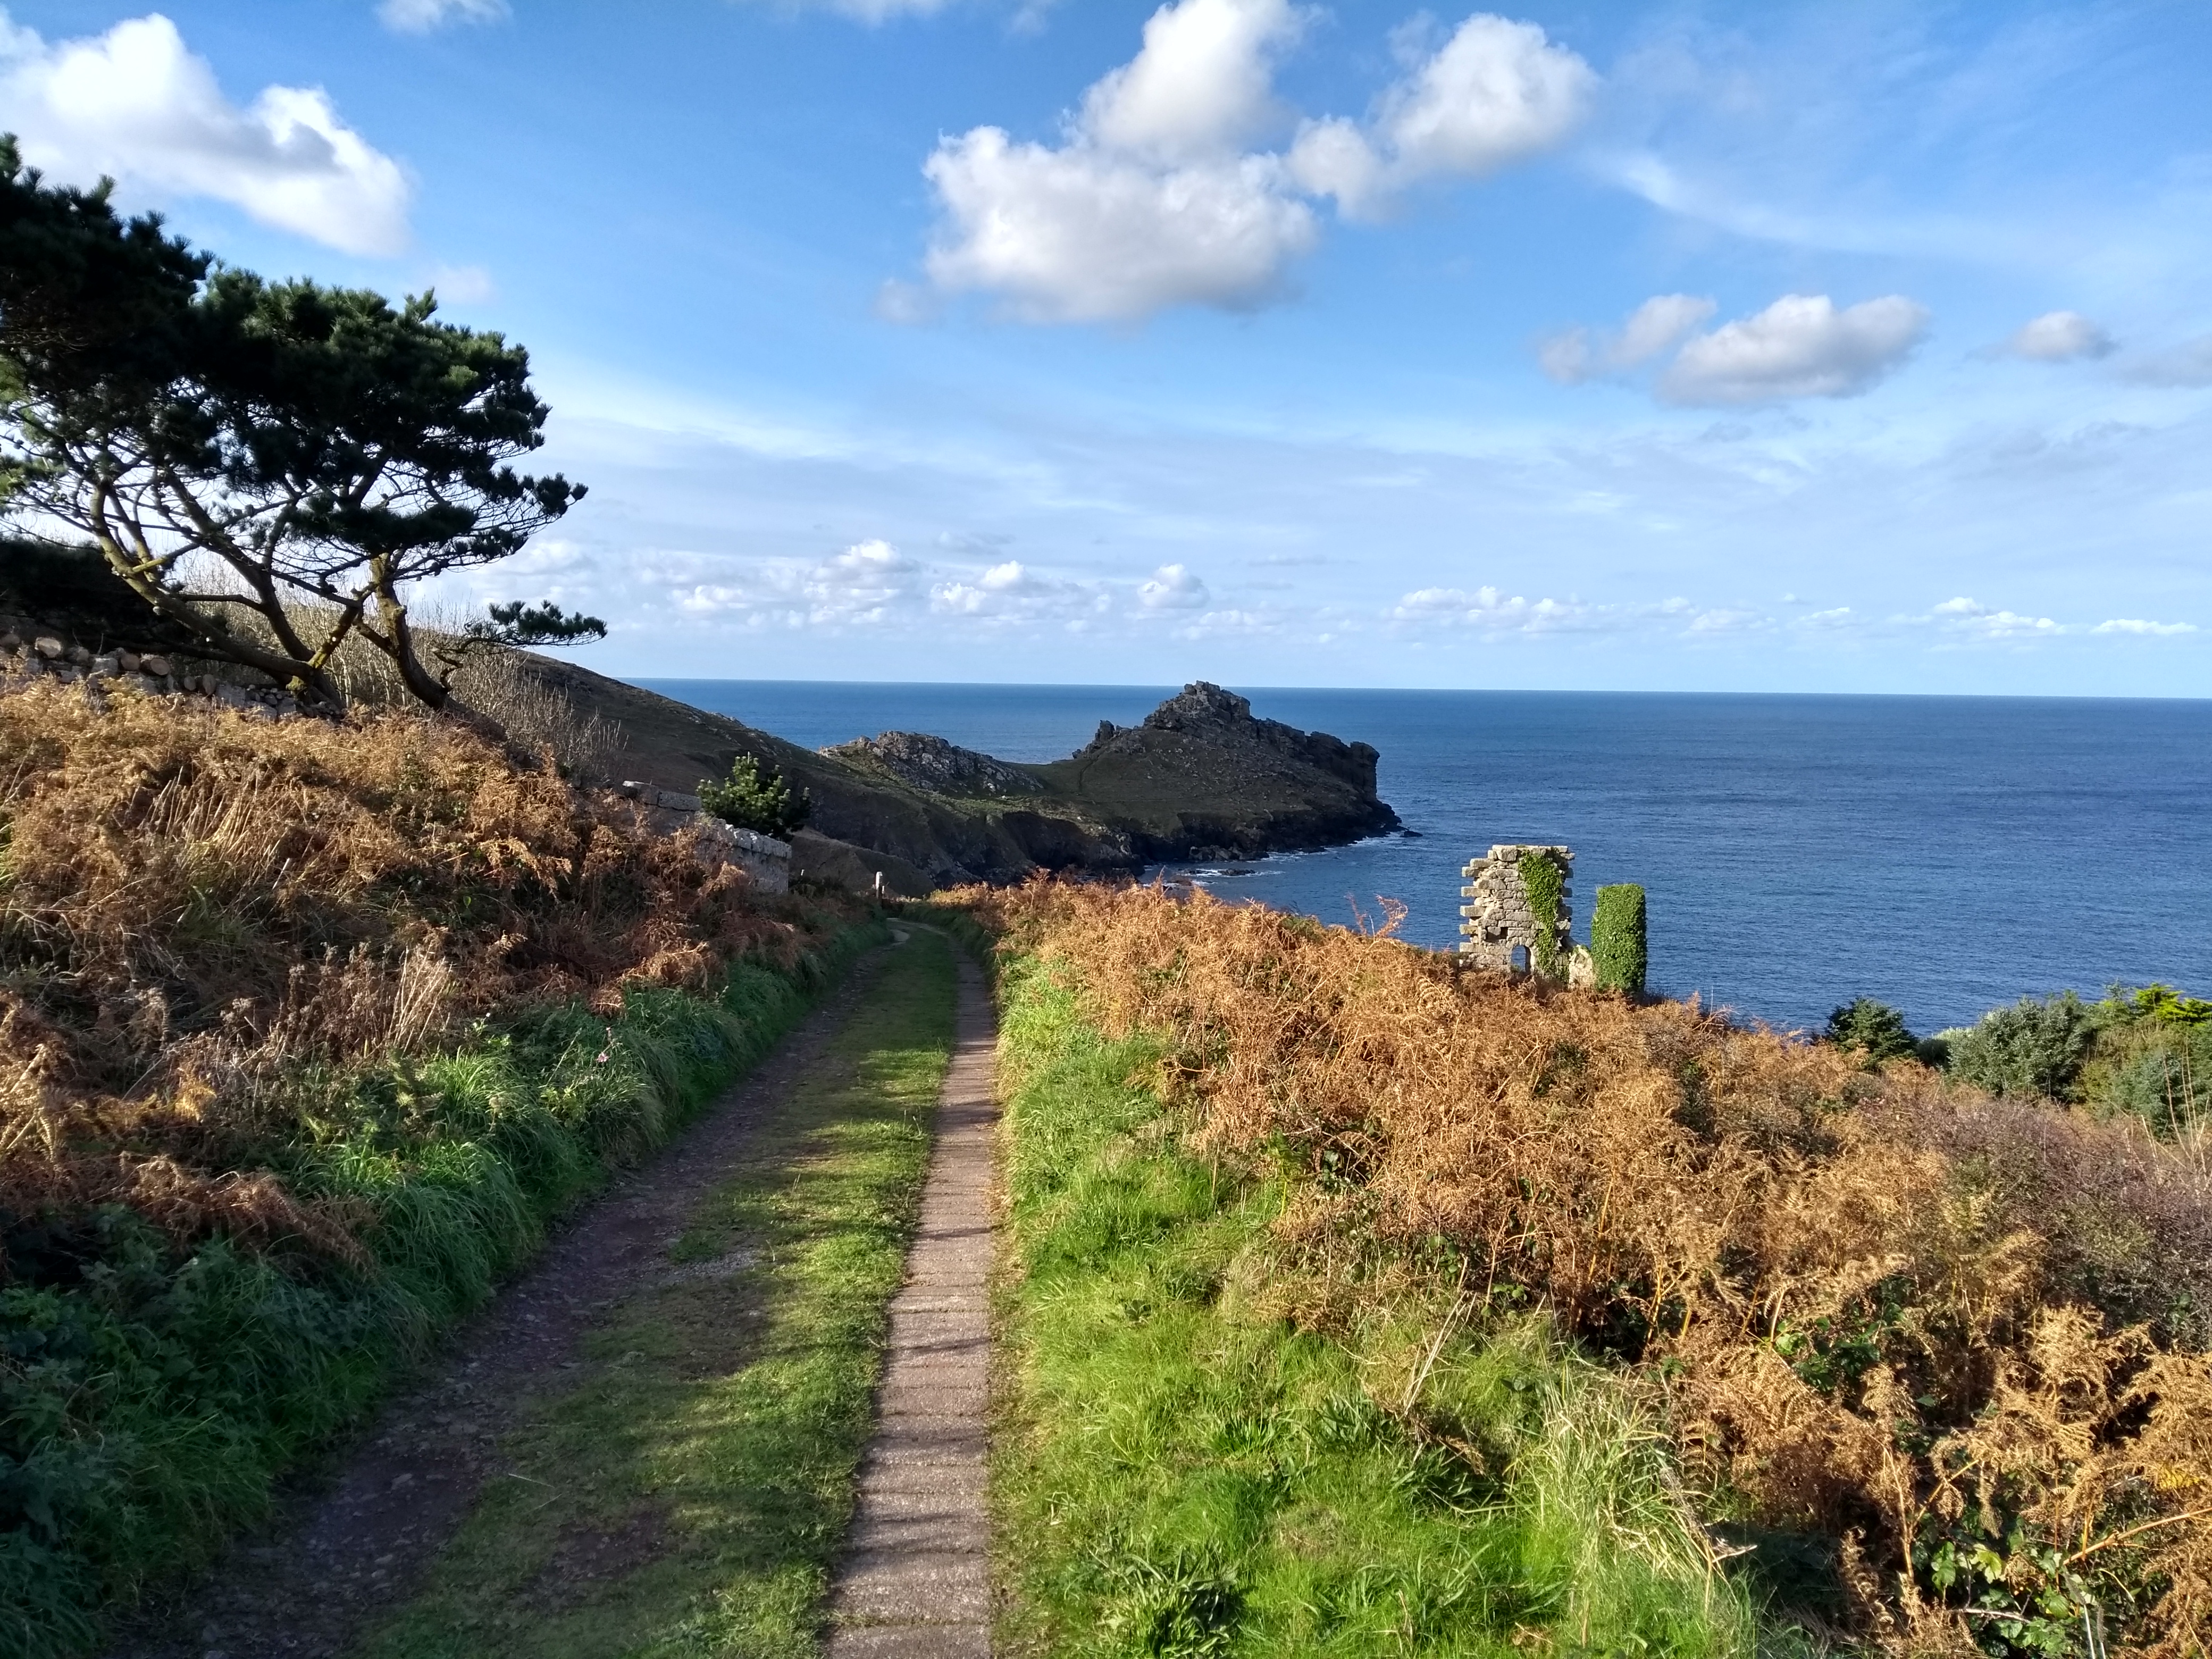 ‘A Dream of Cornwall’: a poem by Matthew Francis